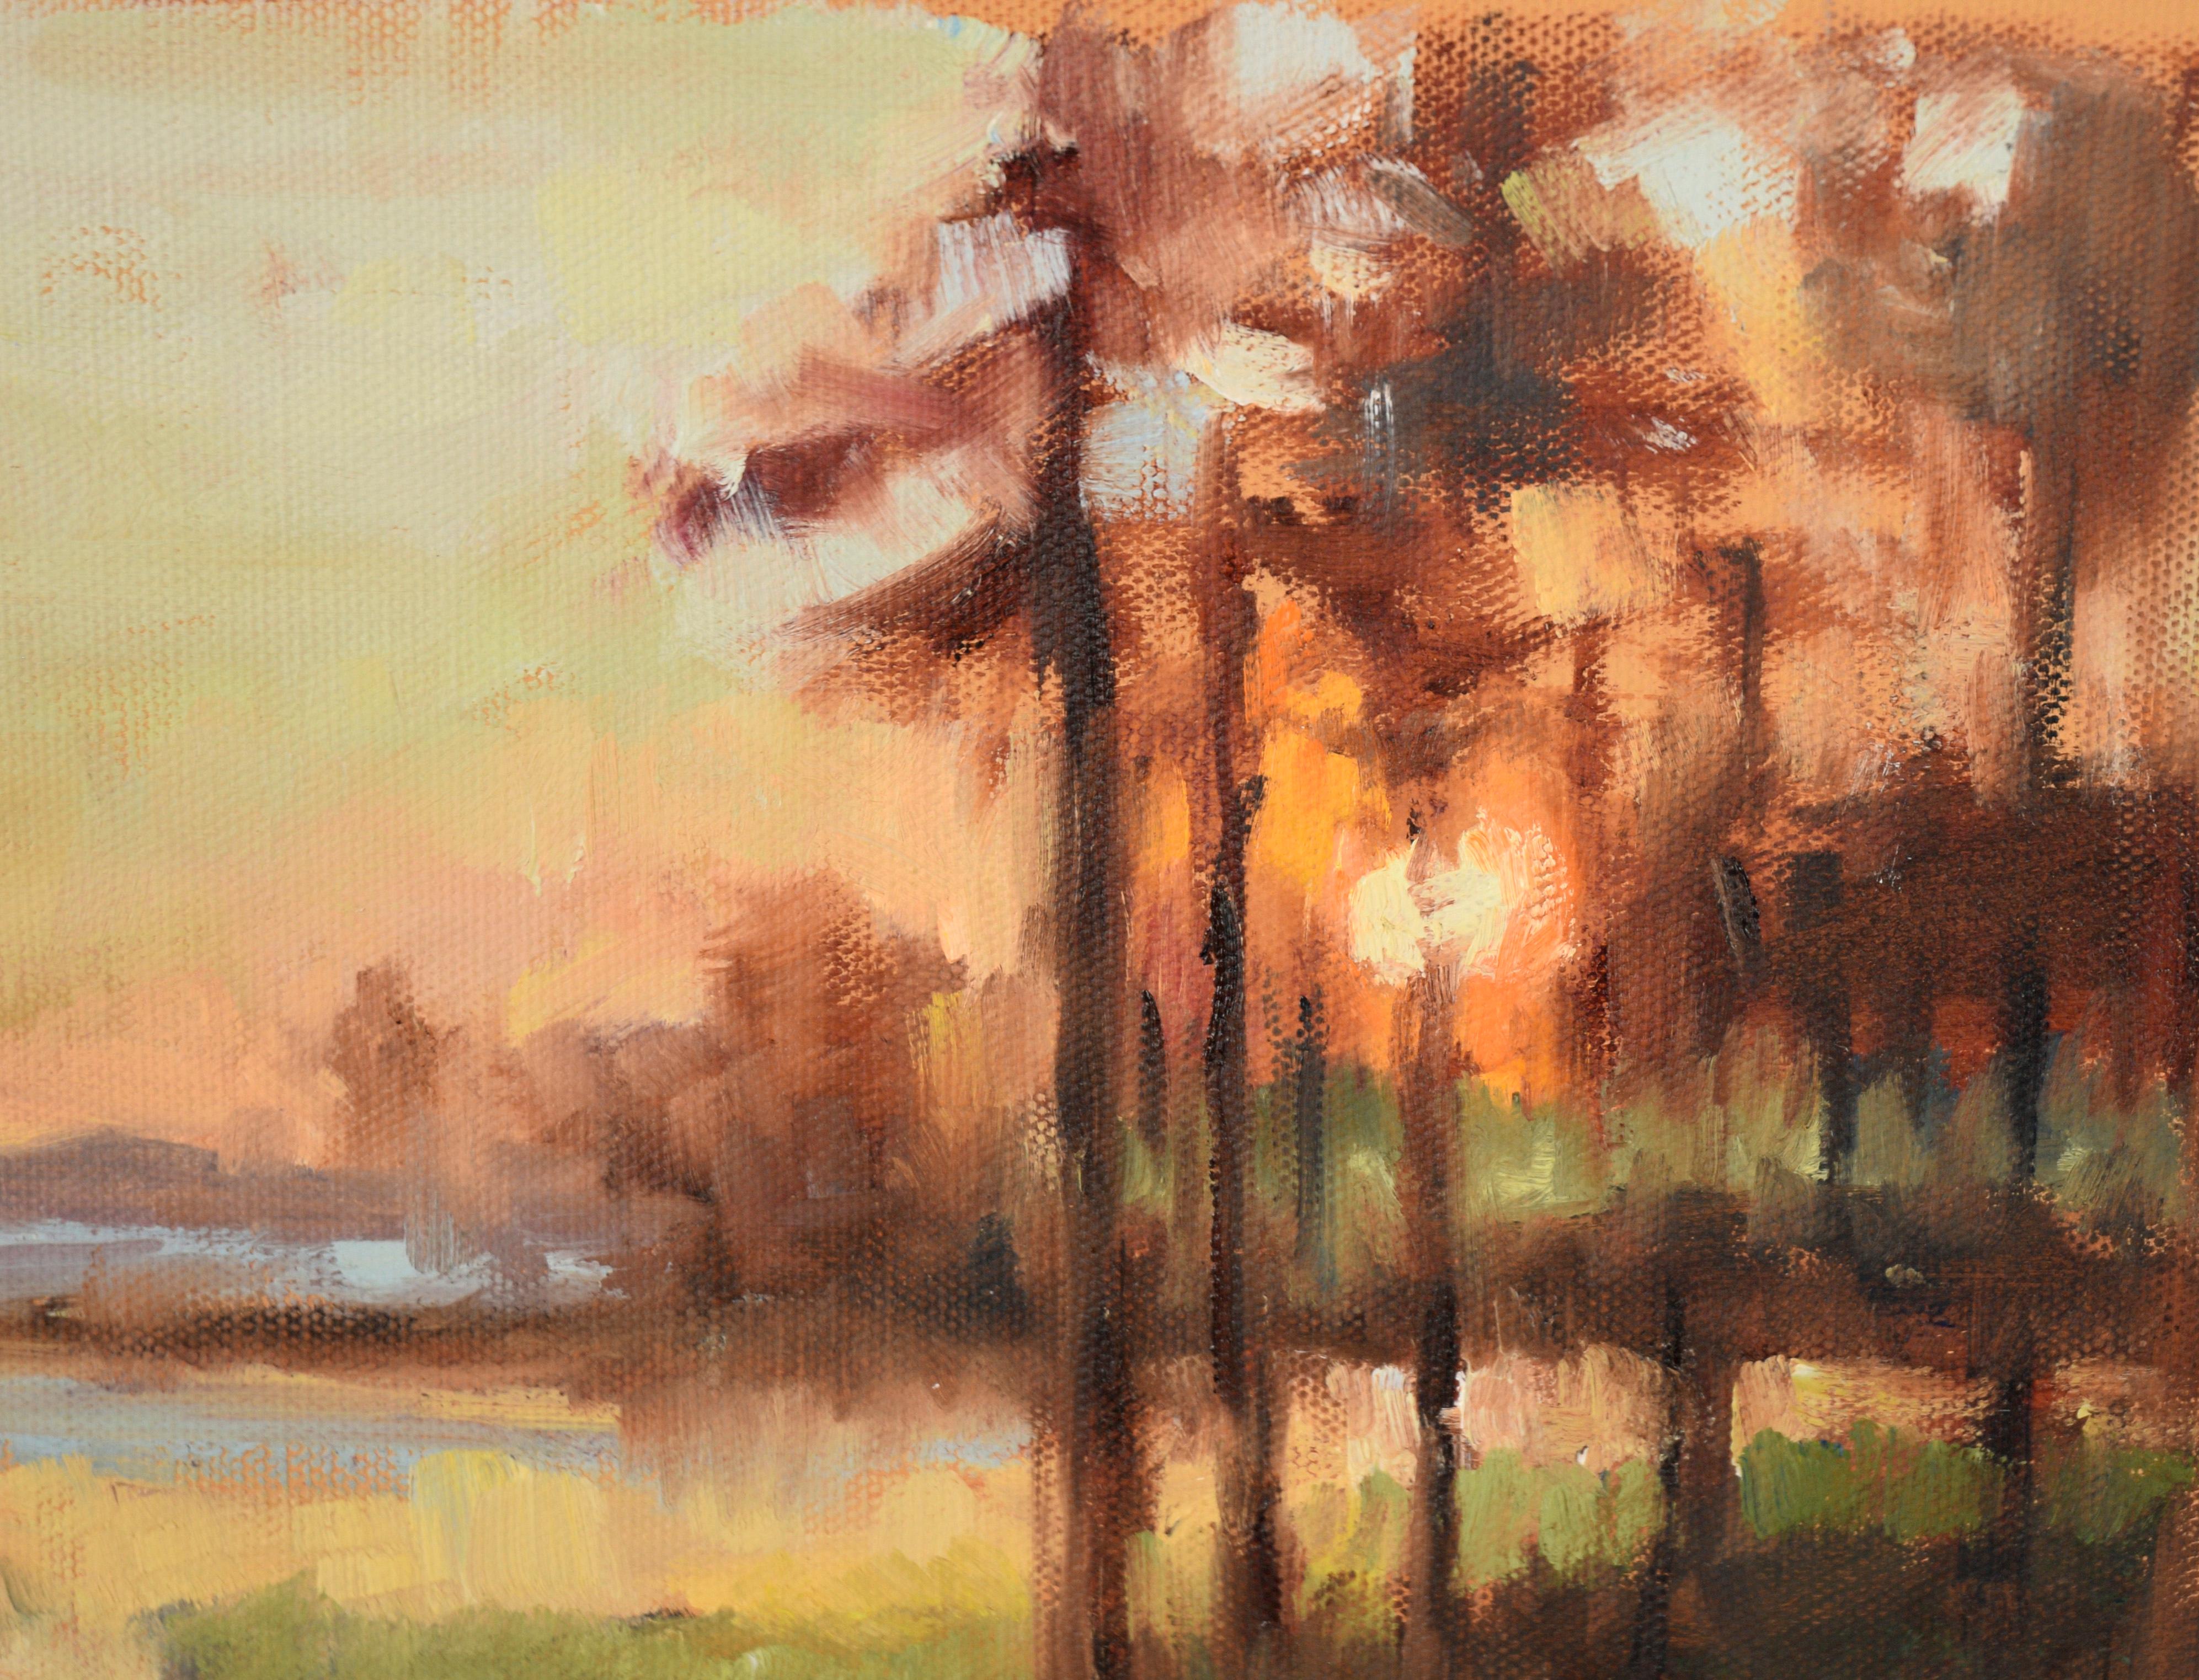 Sunset Through the Trees - Landscape in Oil on Canvas

Lively landscape with a bright sunset by an unknown artist (20th Century). The viewer stands at the edge of a marsh or lake, with a grove of tall trees directly ahead. Through the trees, the sun